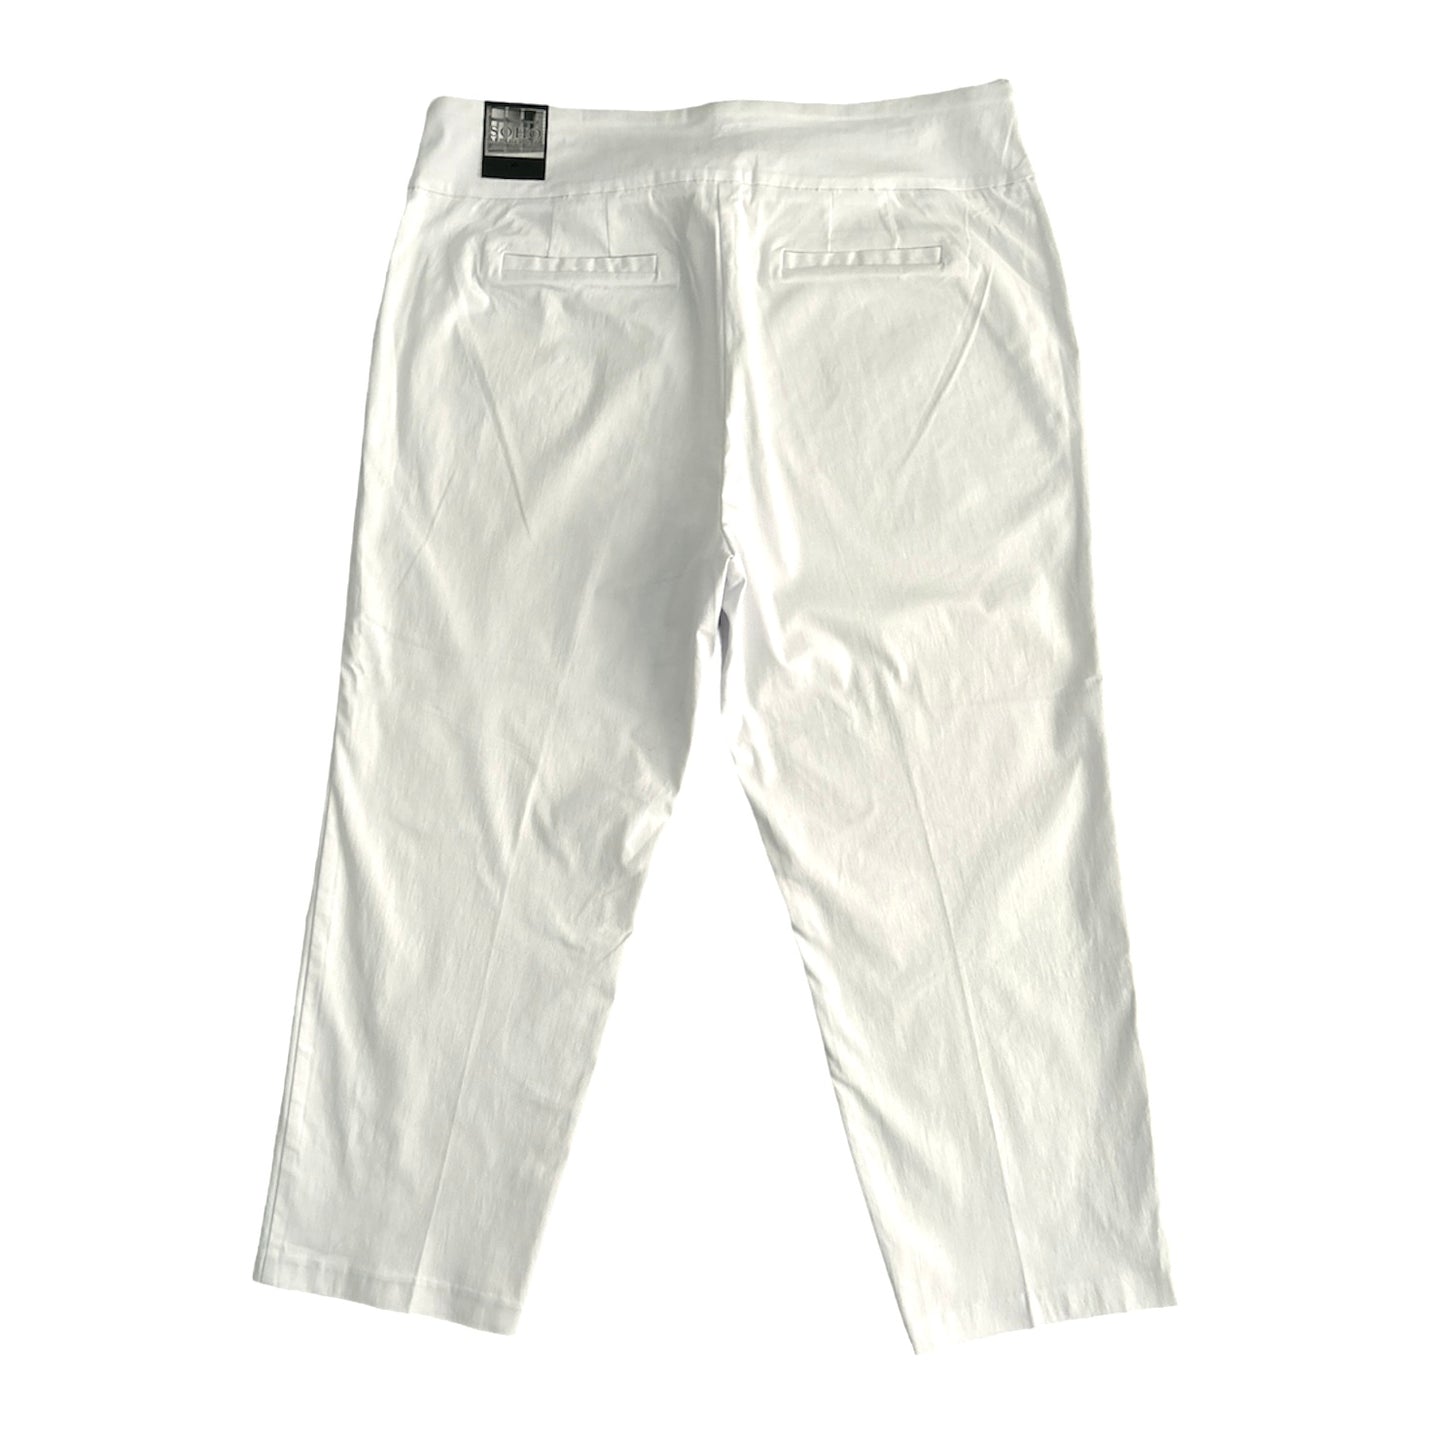 Pull On Stretch White Women's Ankle Pants